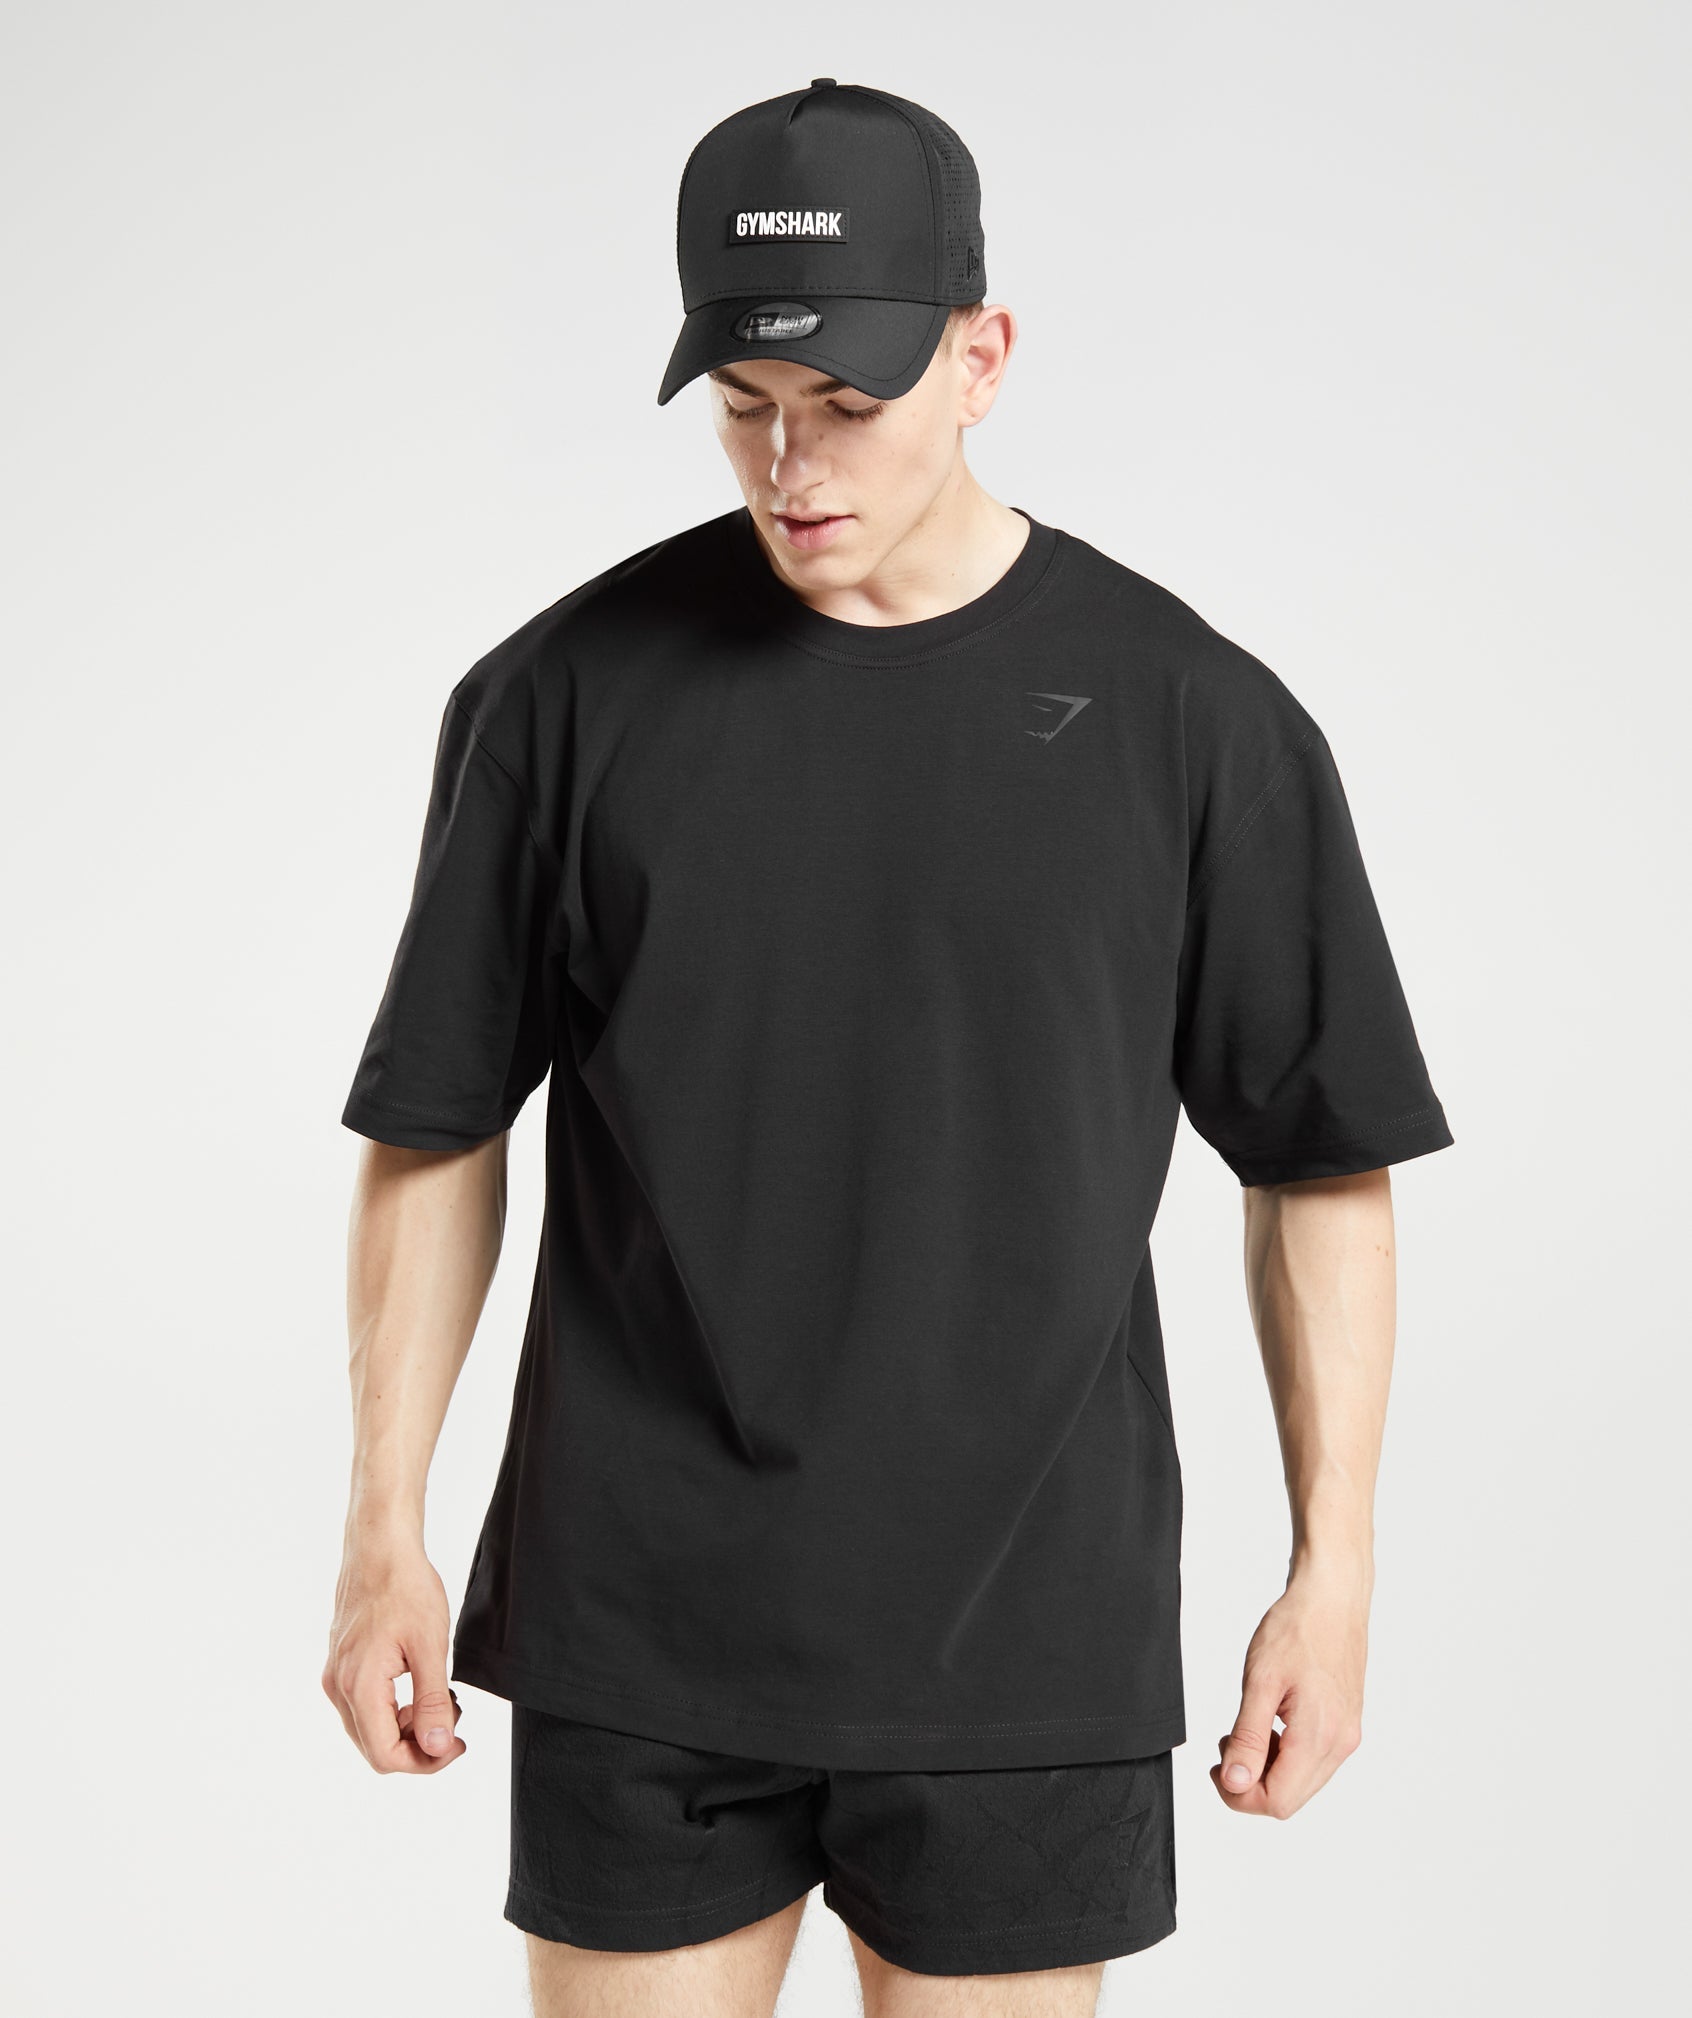 Power T-Shirt in Black - view 4